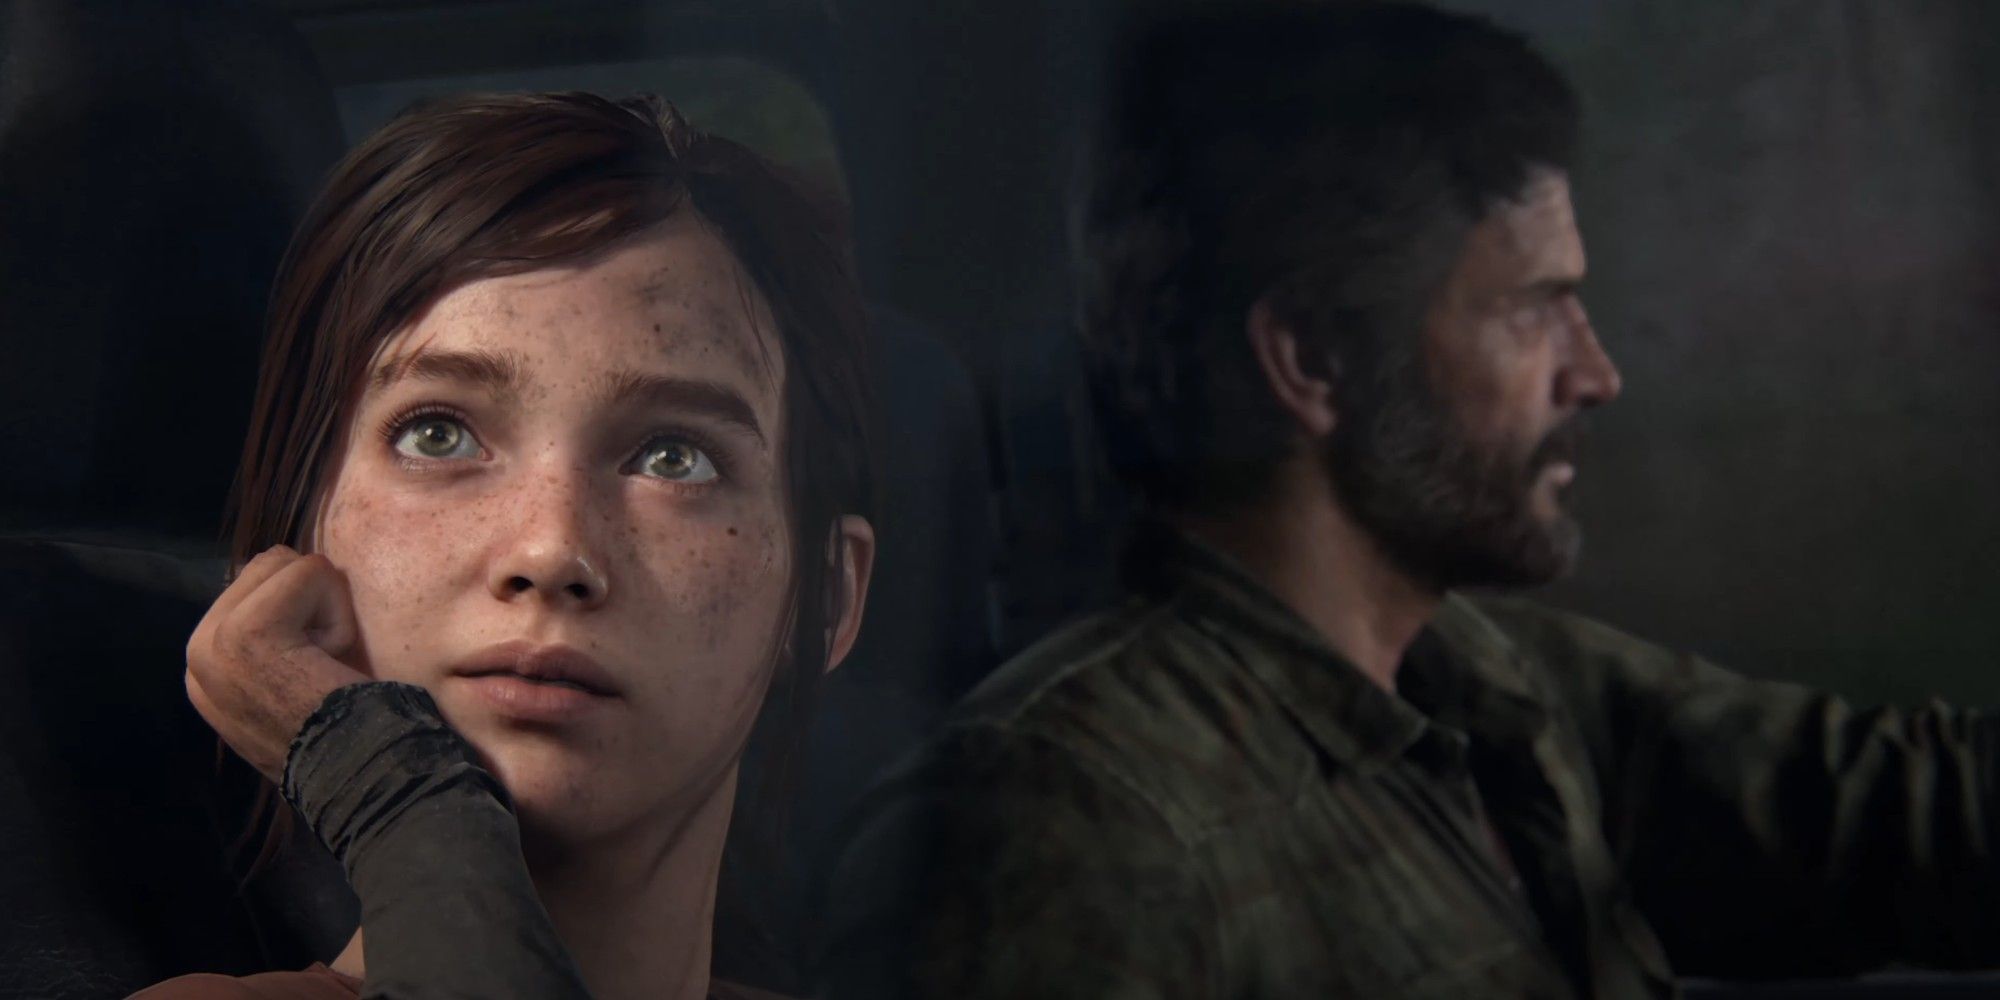 The Last Of Us Remake Characters Compared To TLOU Remaster